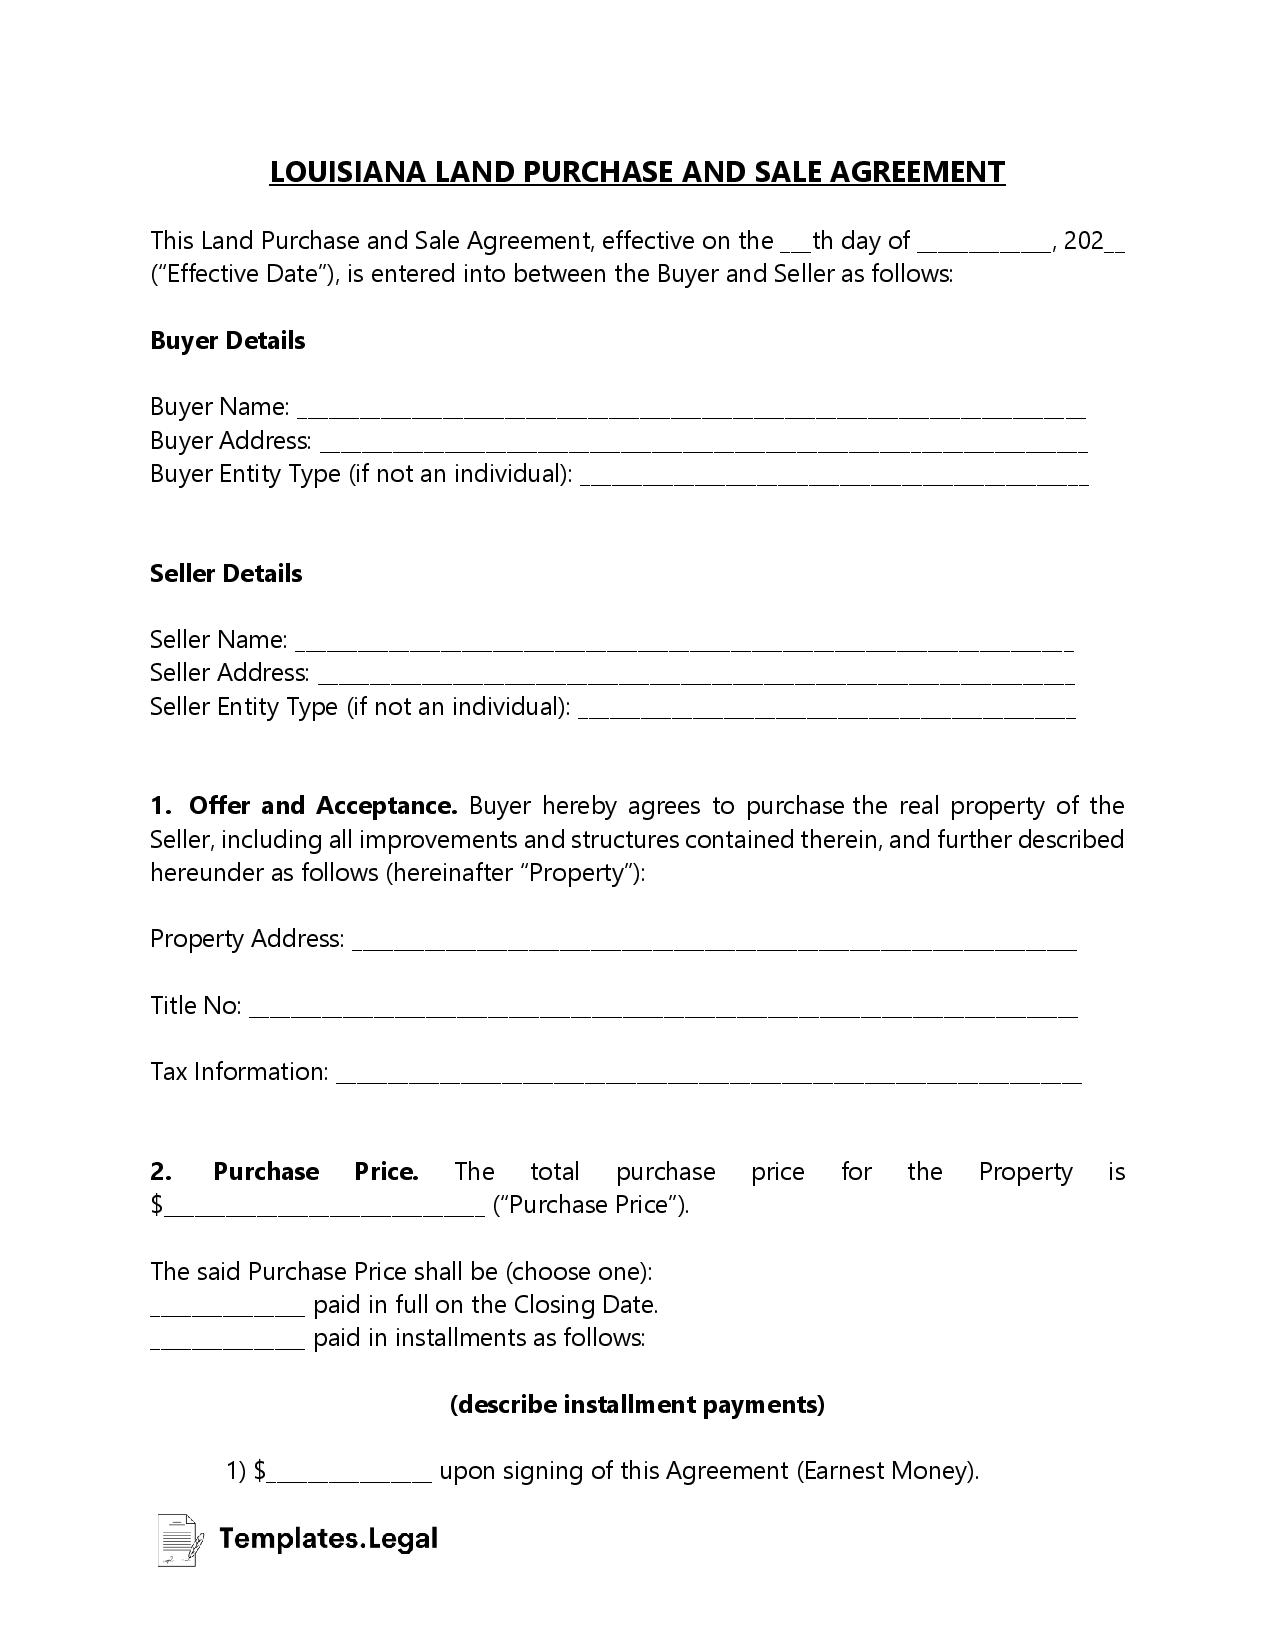 Louisiana Land Purchase and Sale Agreement - Templates.Legal